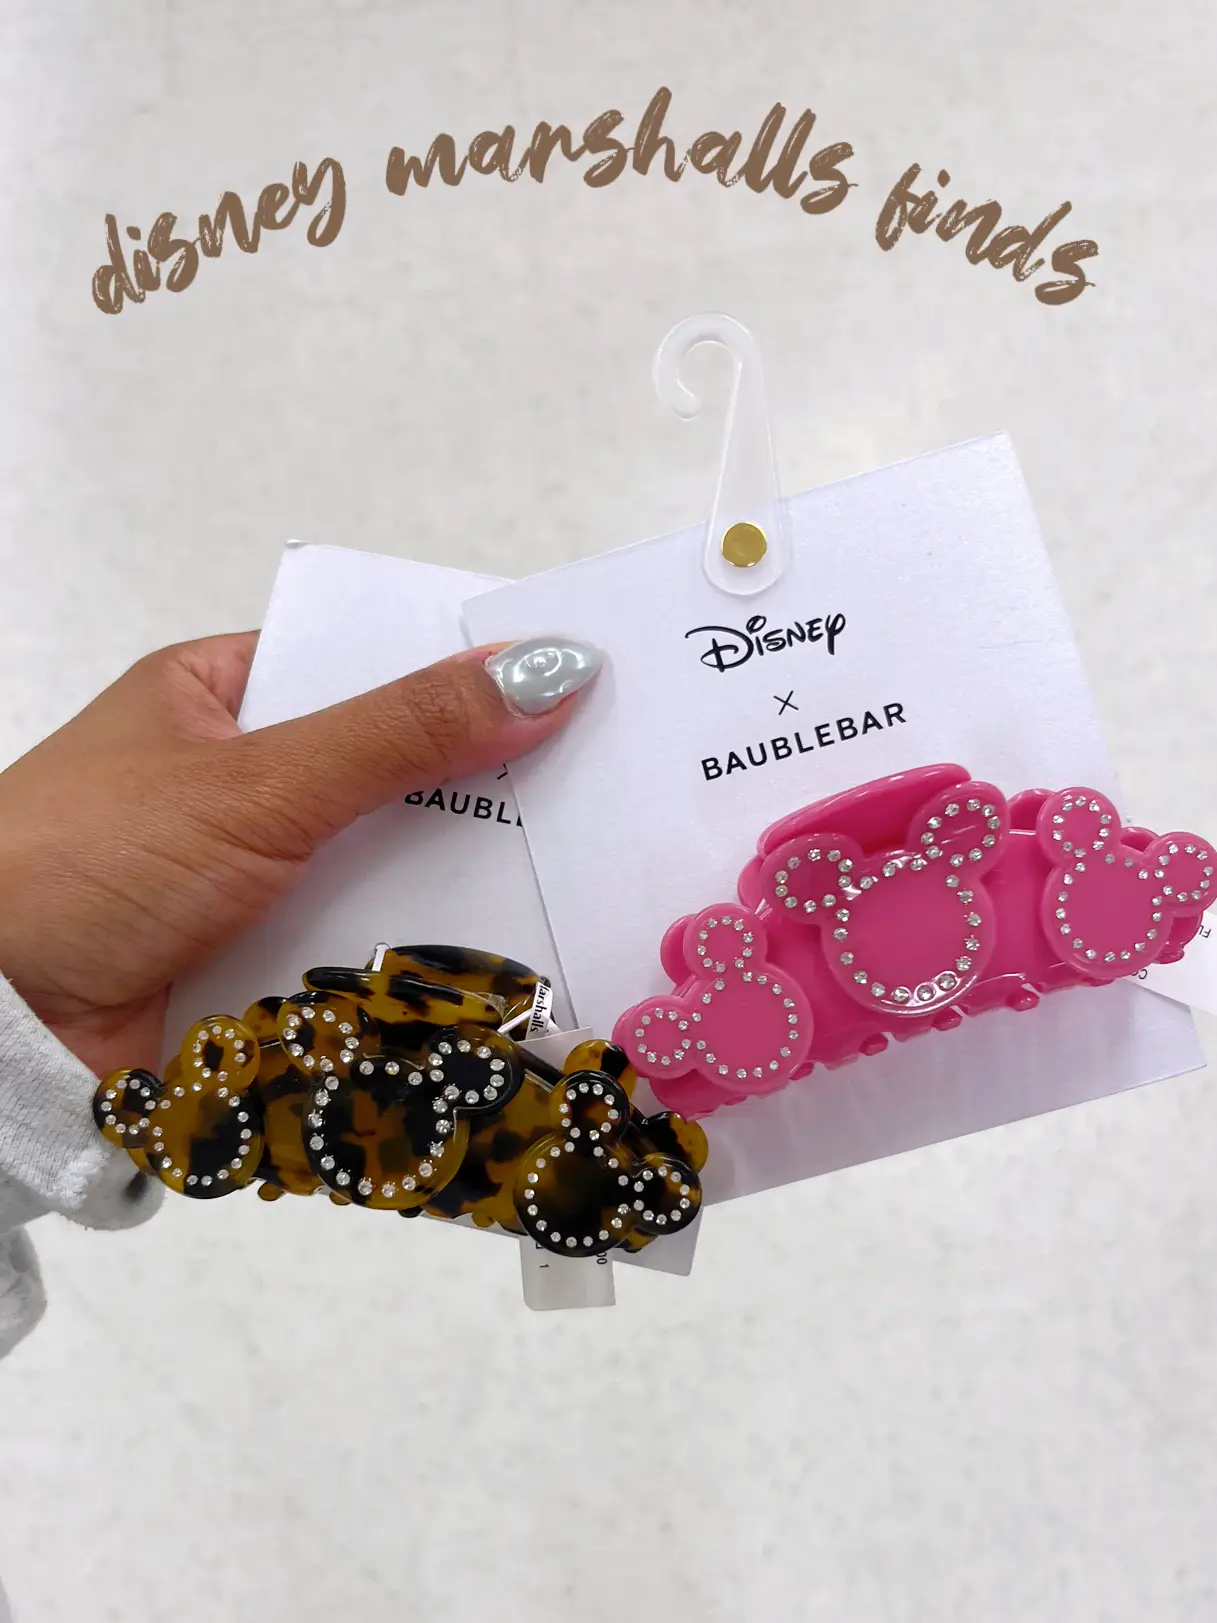 Disney x Baublebar at Marshalls 😍✨ Not gonna lie I look for the